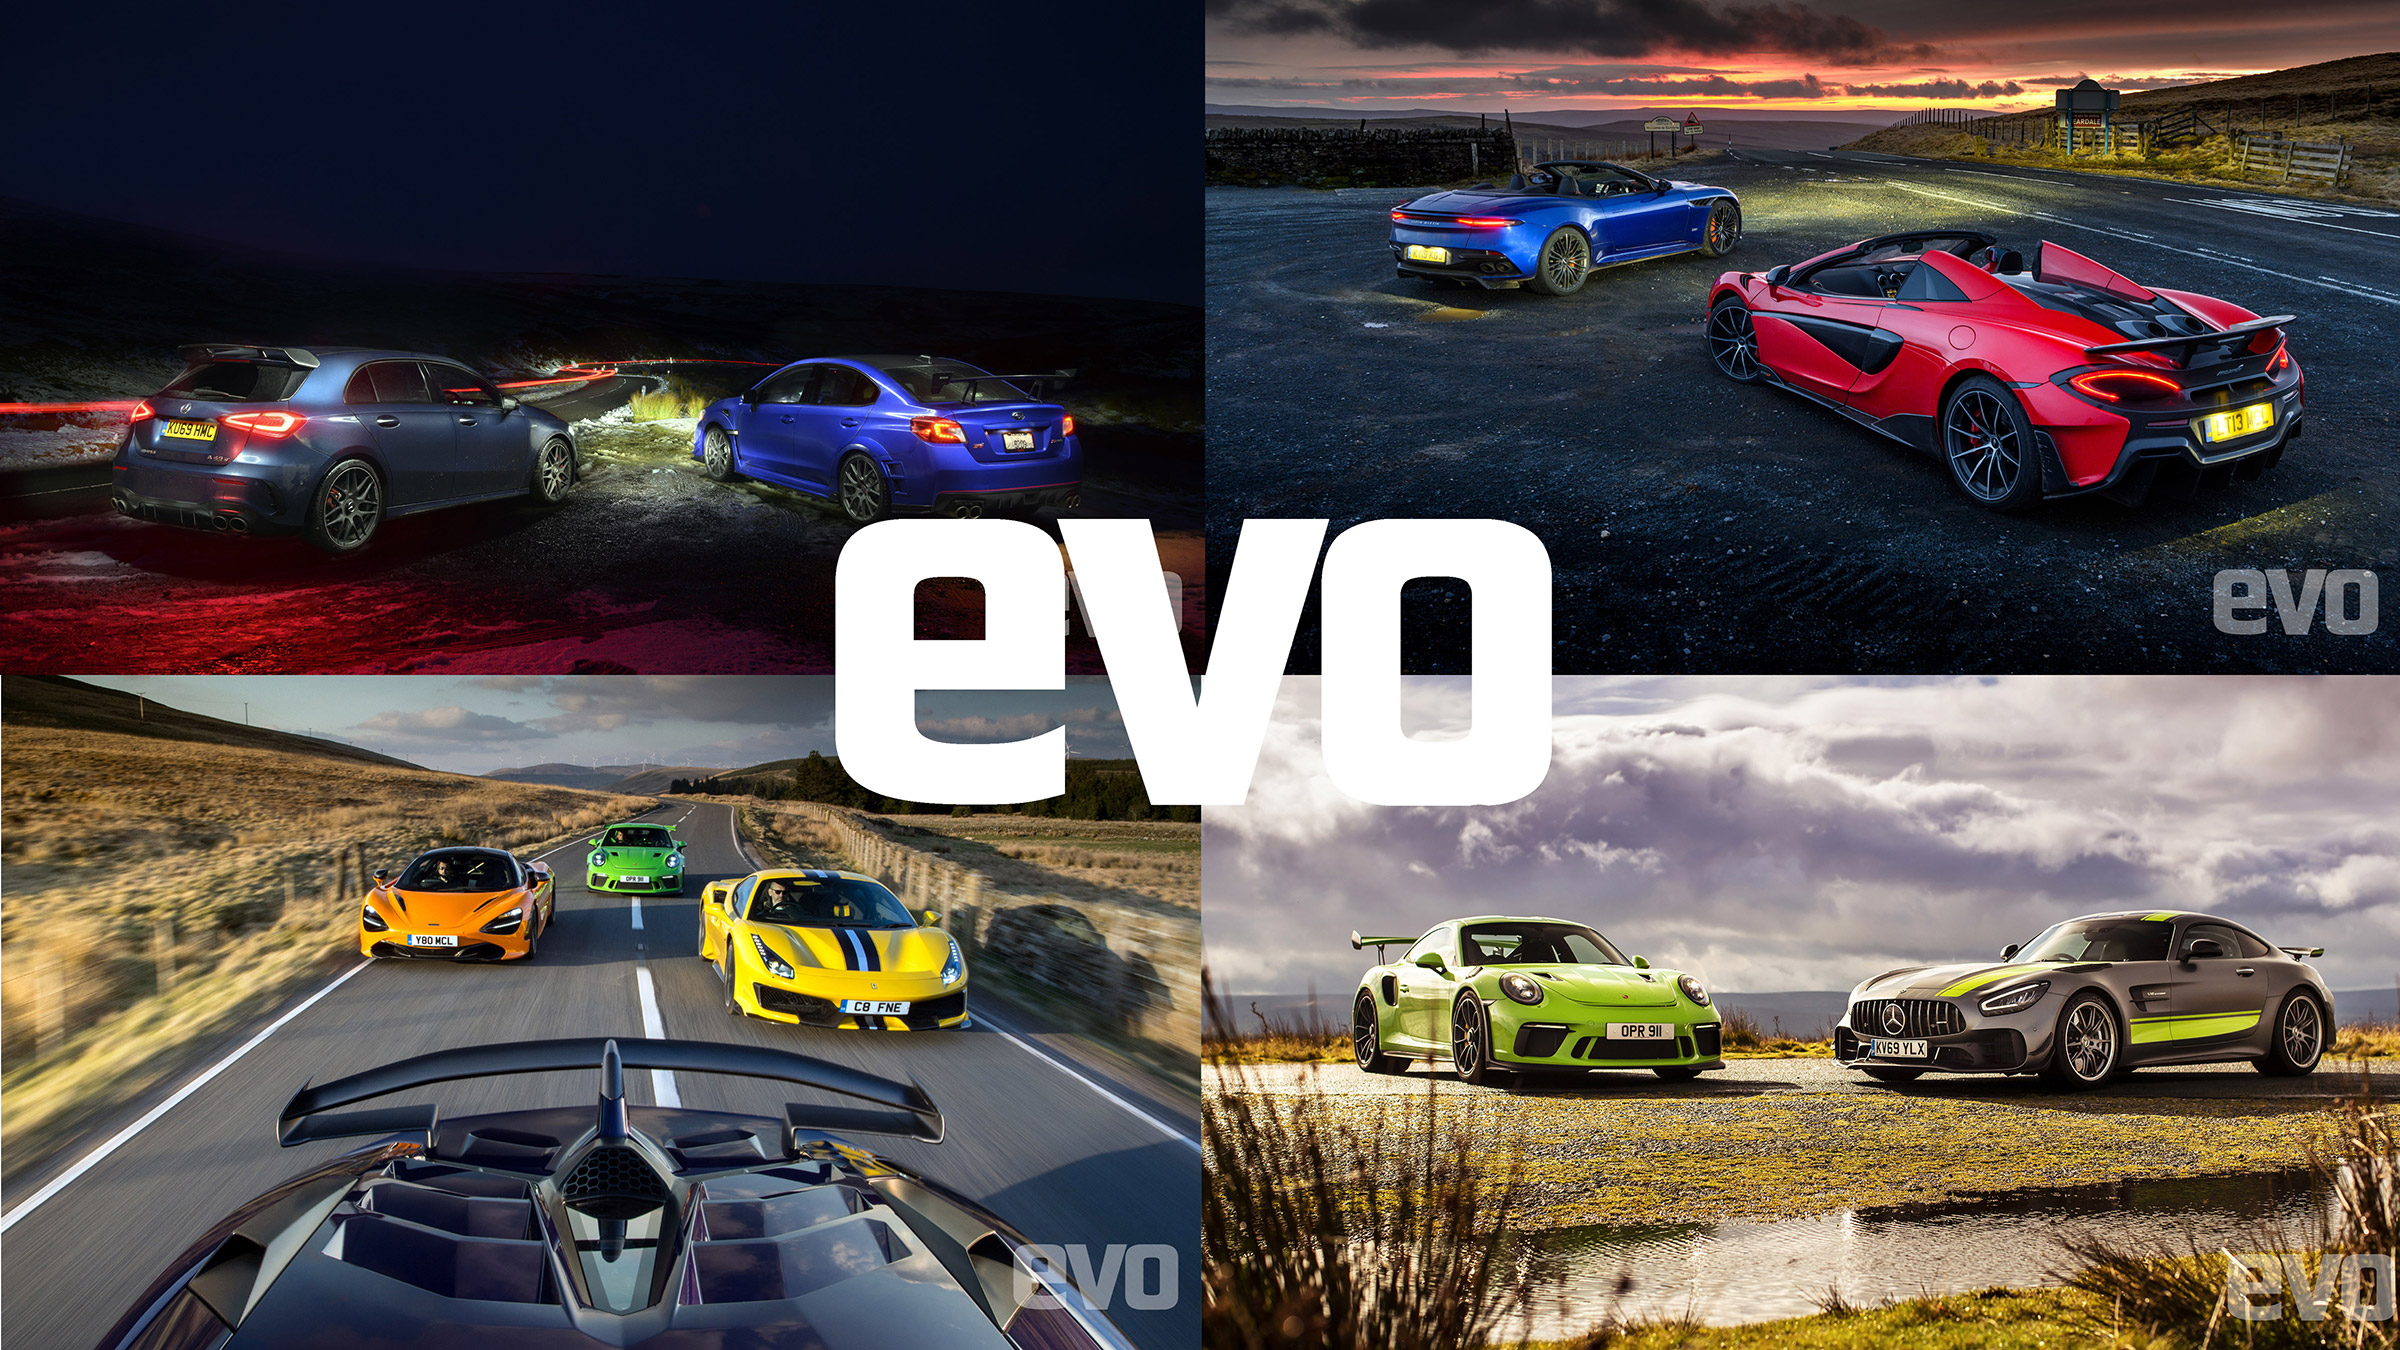 Best car wallpapers – evo car photography for your desktop and phone | evo